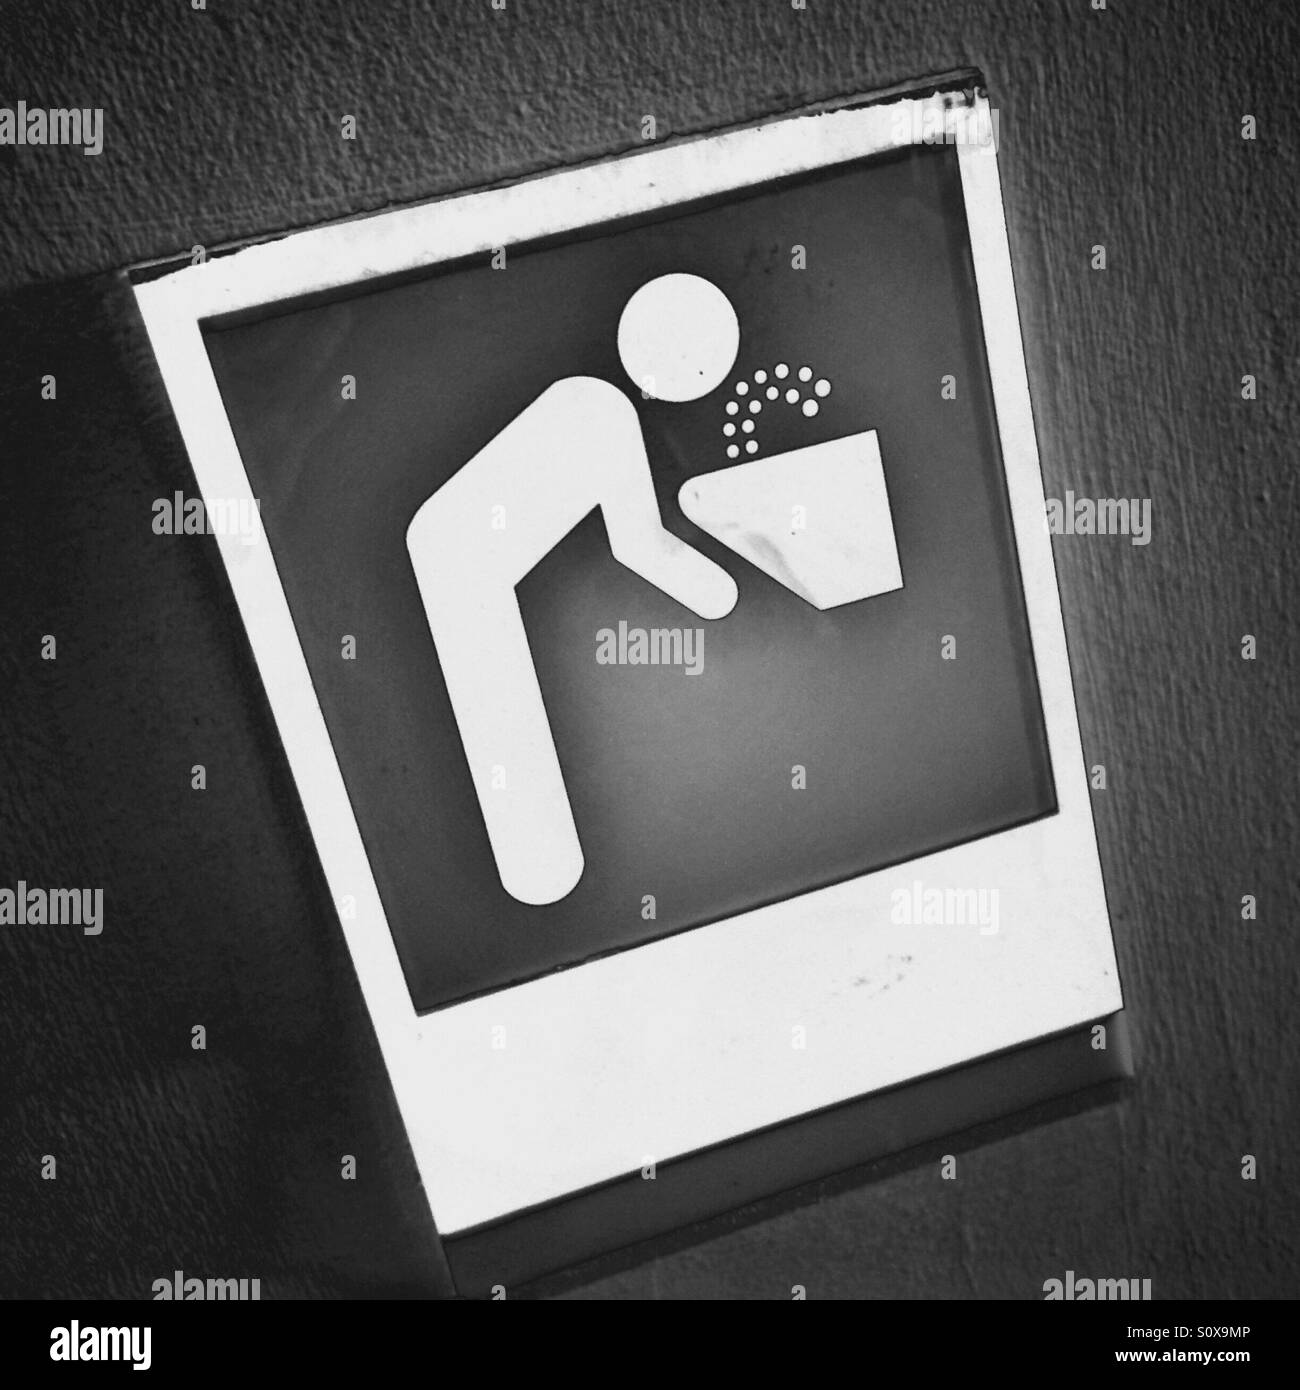 Drinking water sign Stock Photo